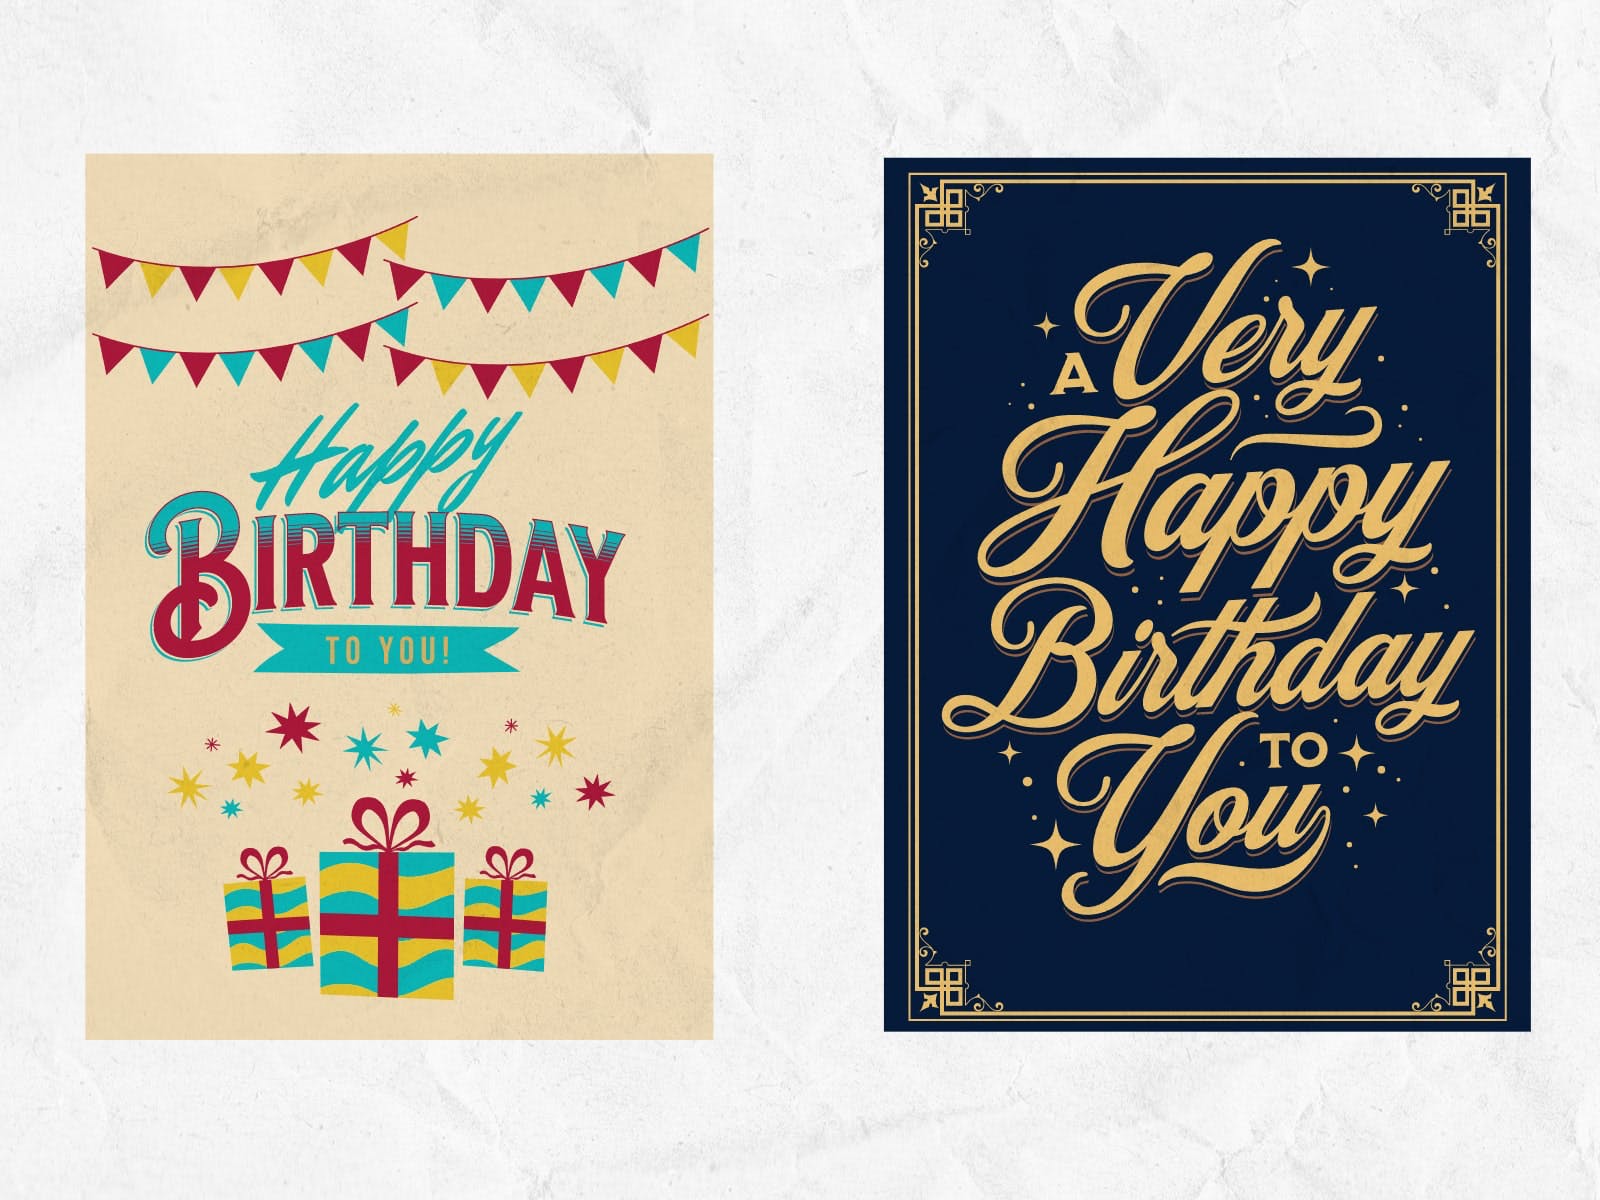 Birthday Card: Collection of birthday greeting cards